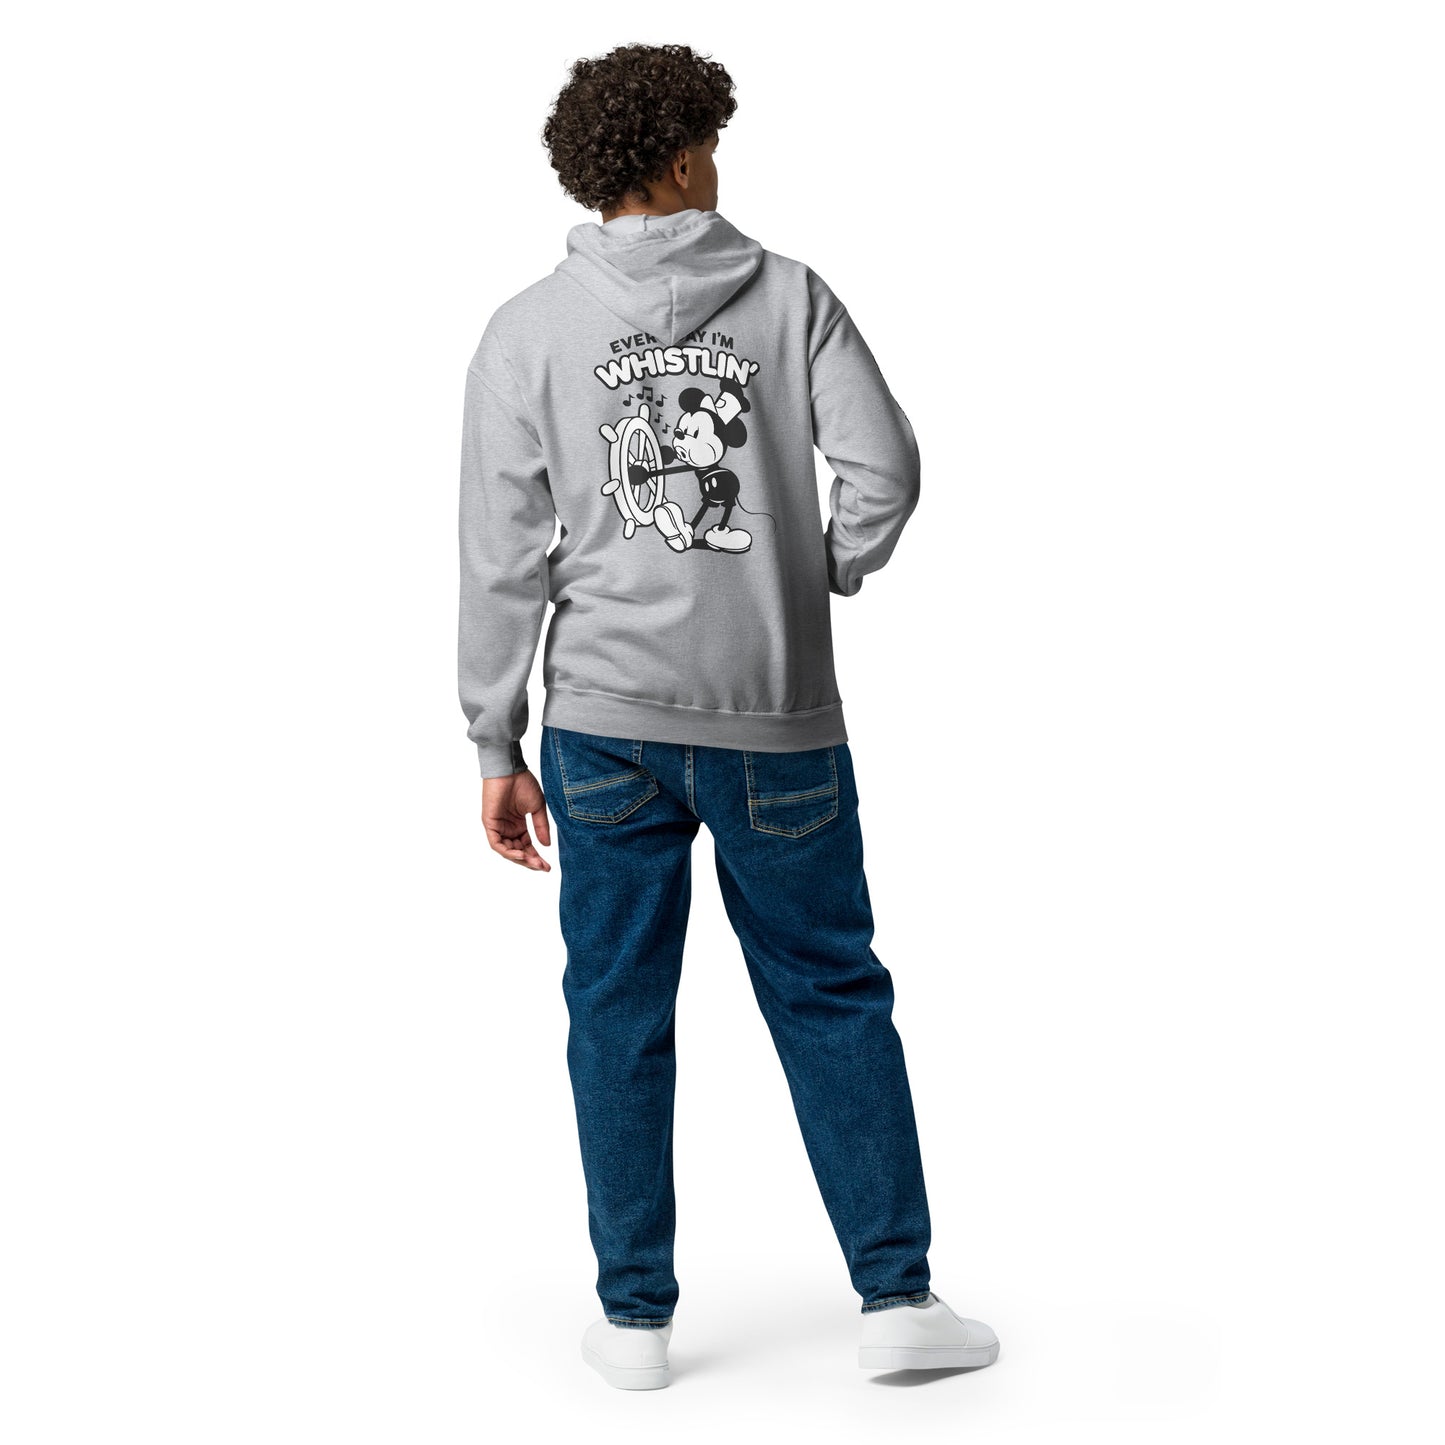 Every Day! Heavy Blend Zip Hoodie - Steamboat Willie World